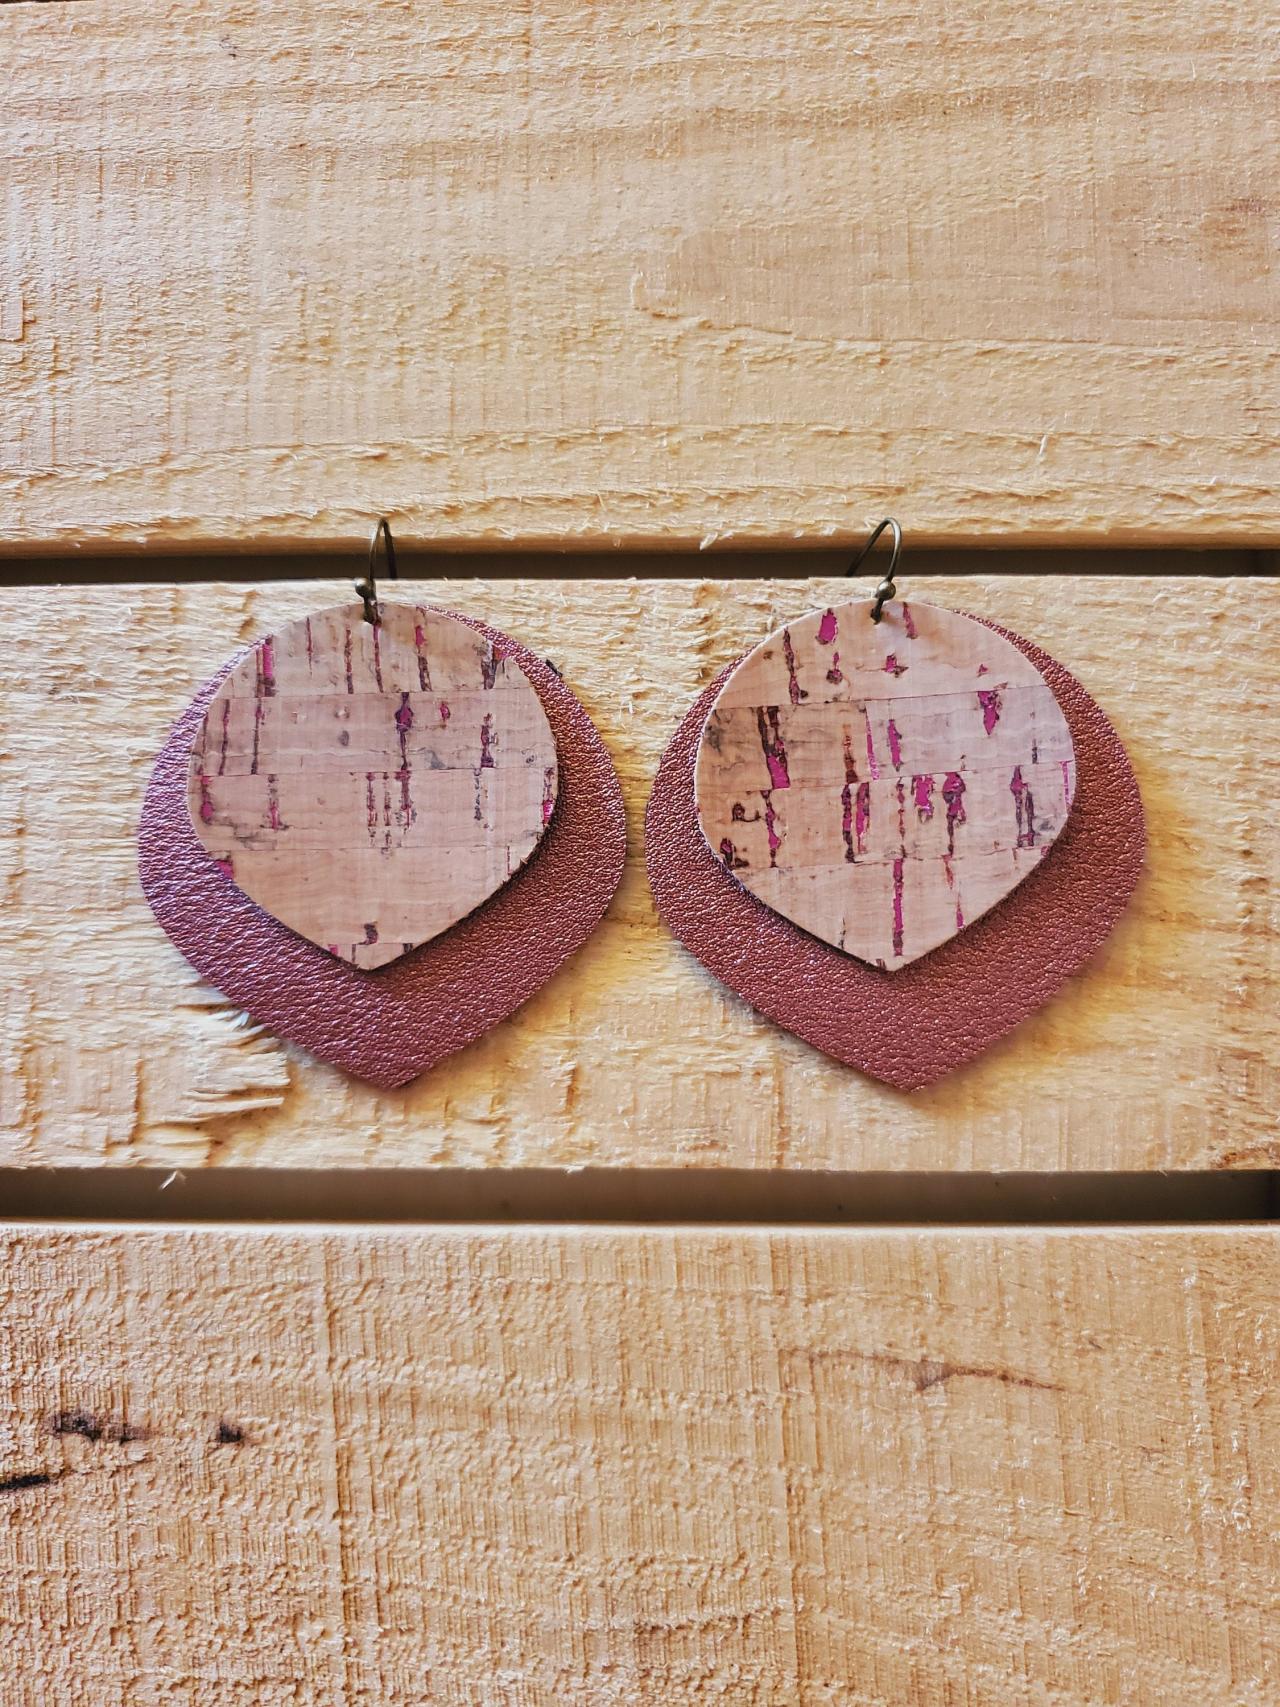 Pink Leather Cork Earrings, October Earrings, Breast Cancer Awareness Cork Leather Earrings, Cancer Jewelry, Pink Jewelry, Rose Gold, Gift